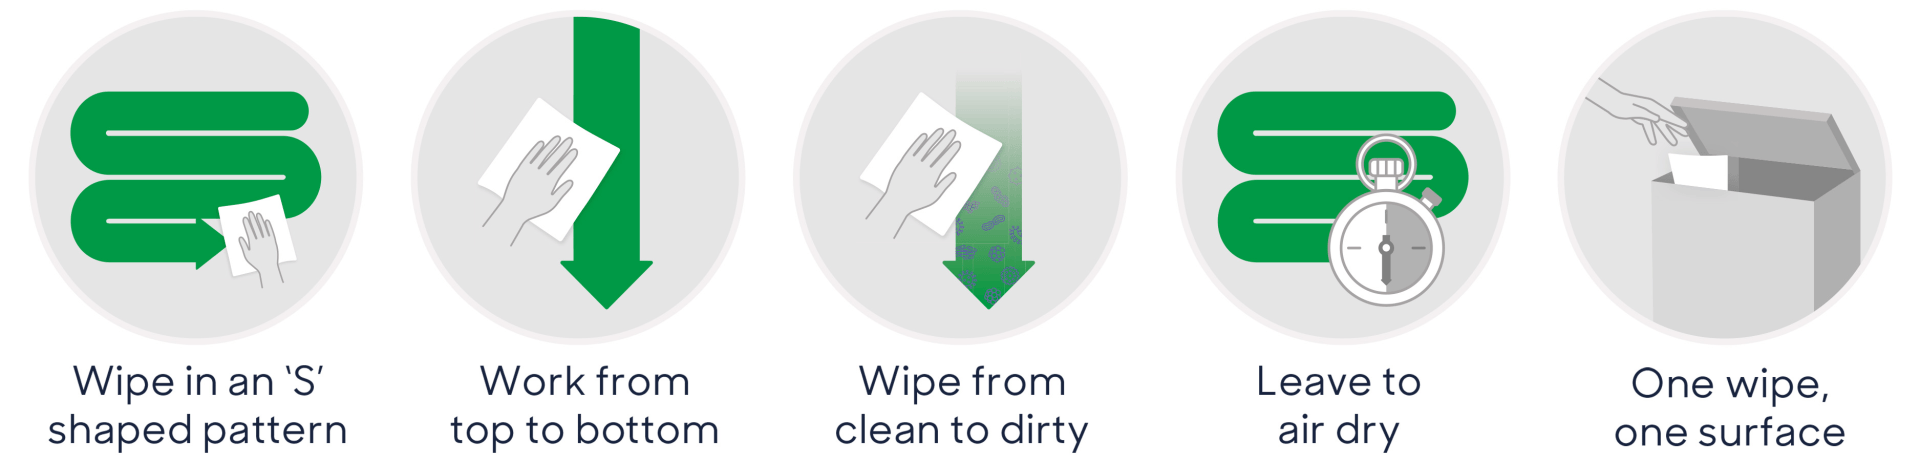 5-Principles-Of-Cleaning-5